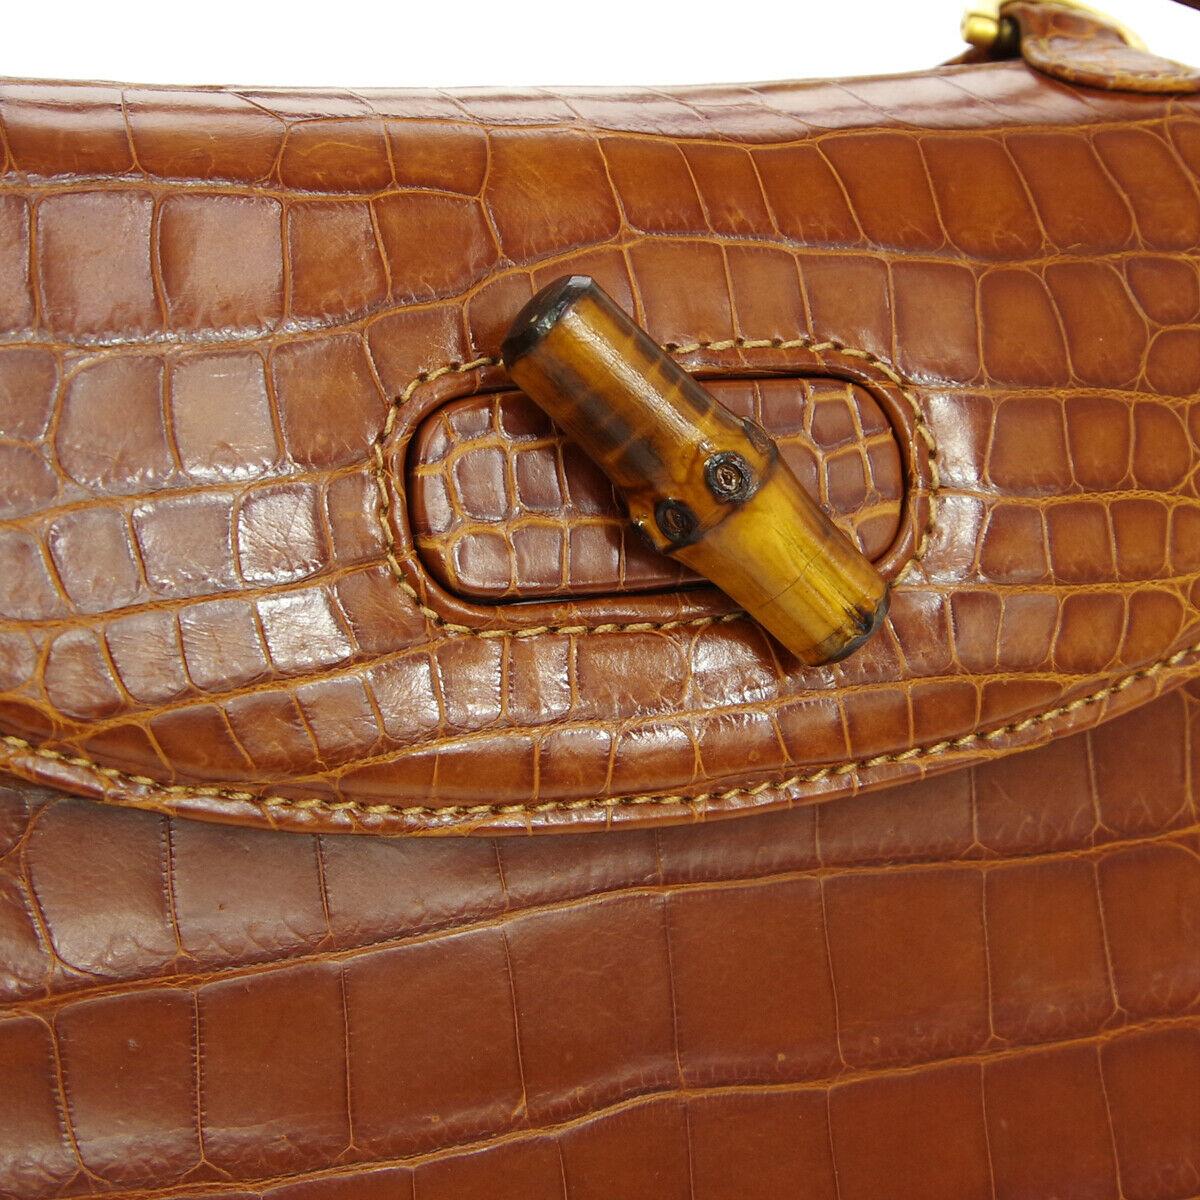 
Crocodile
Leather
Bamboo
Gold tone hardware
Made in Italy
Handle drop 4.75